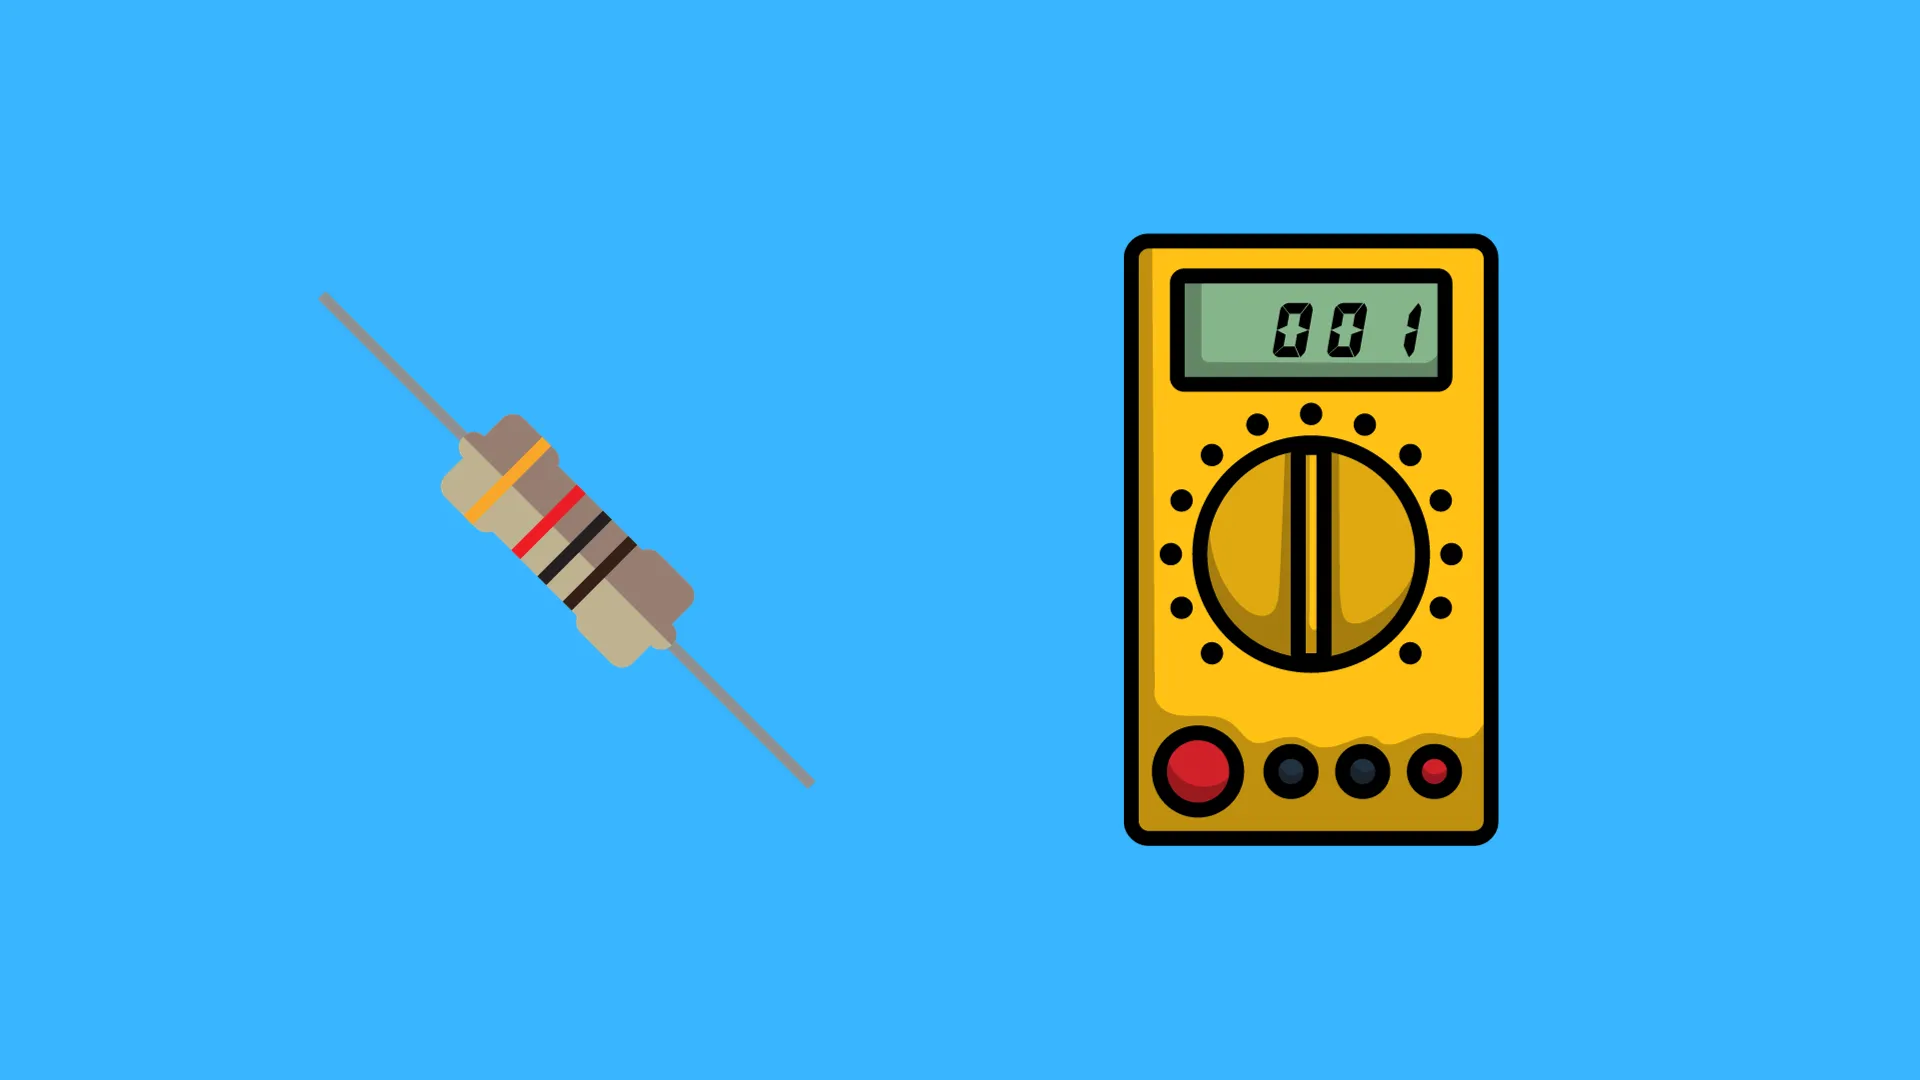 How To Test Resistor With Multimeter